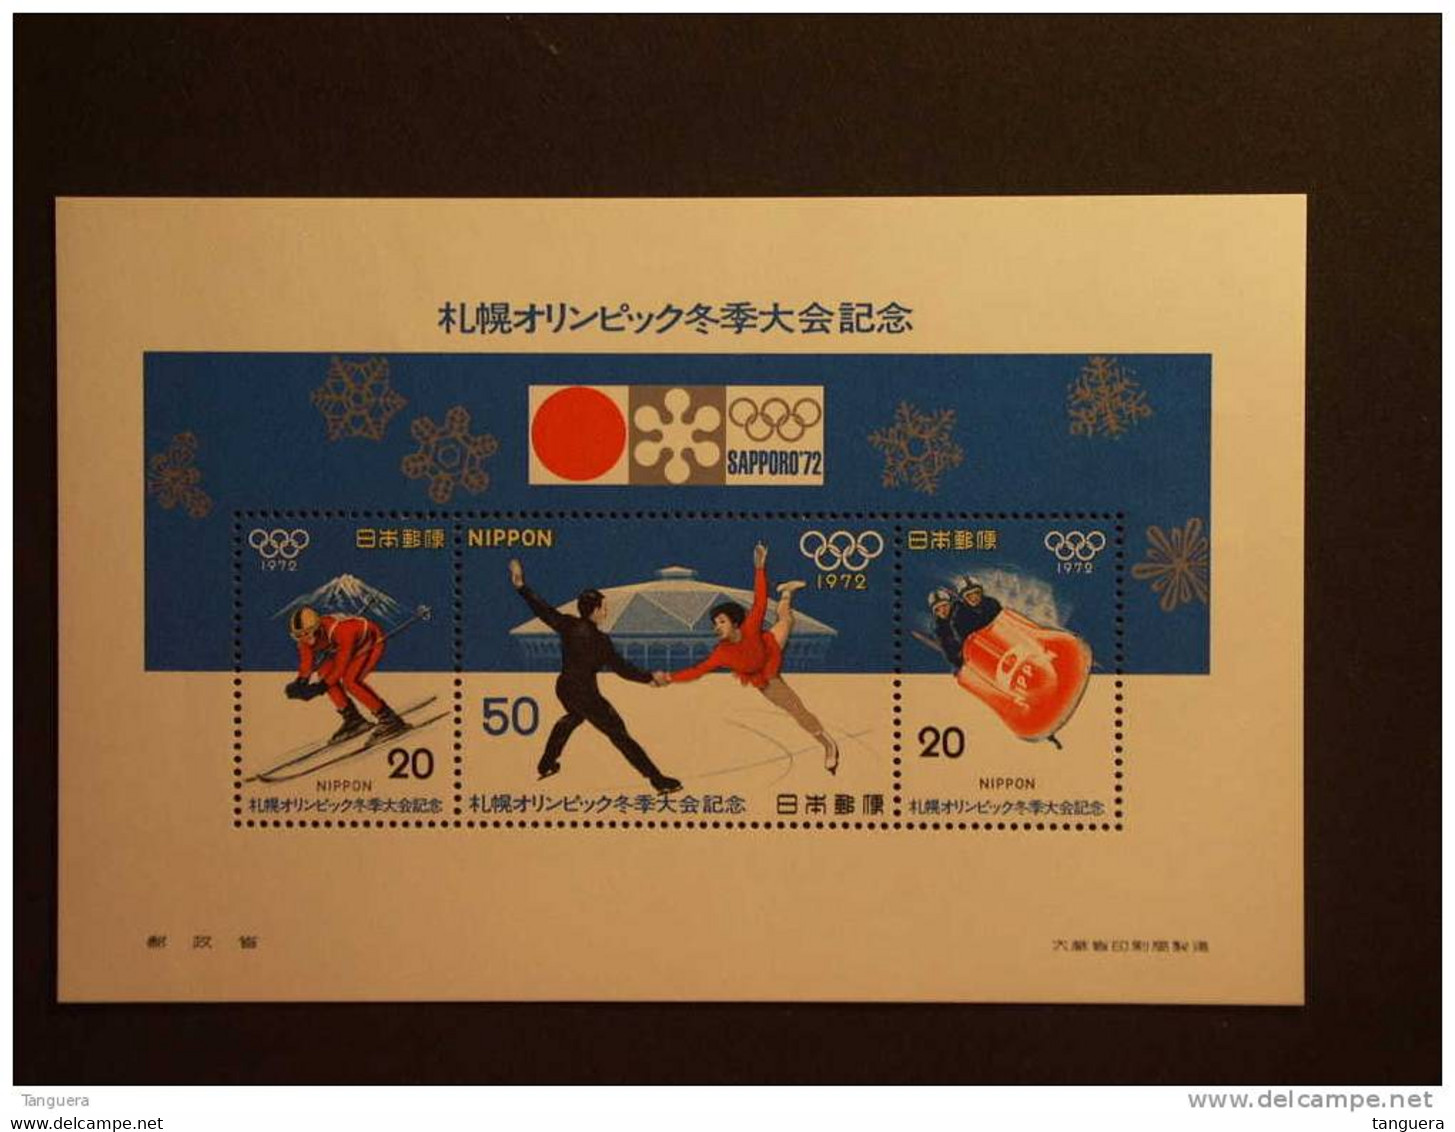 Japan Japon Nippon 1972 Jeux Olympique D'hiver Sapporo O.S Bobsleigh Descente Patinage Yv BF 70 MNH ** - Blocs-feuillets